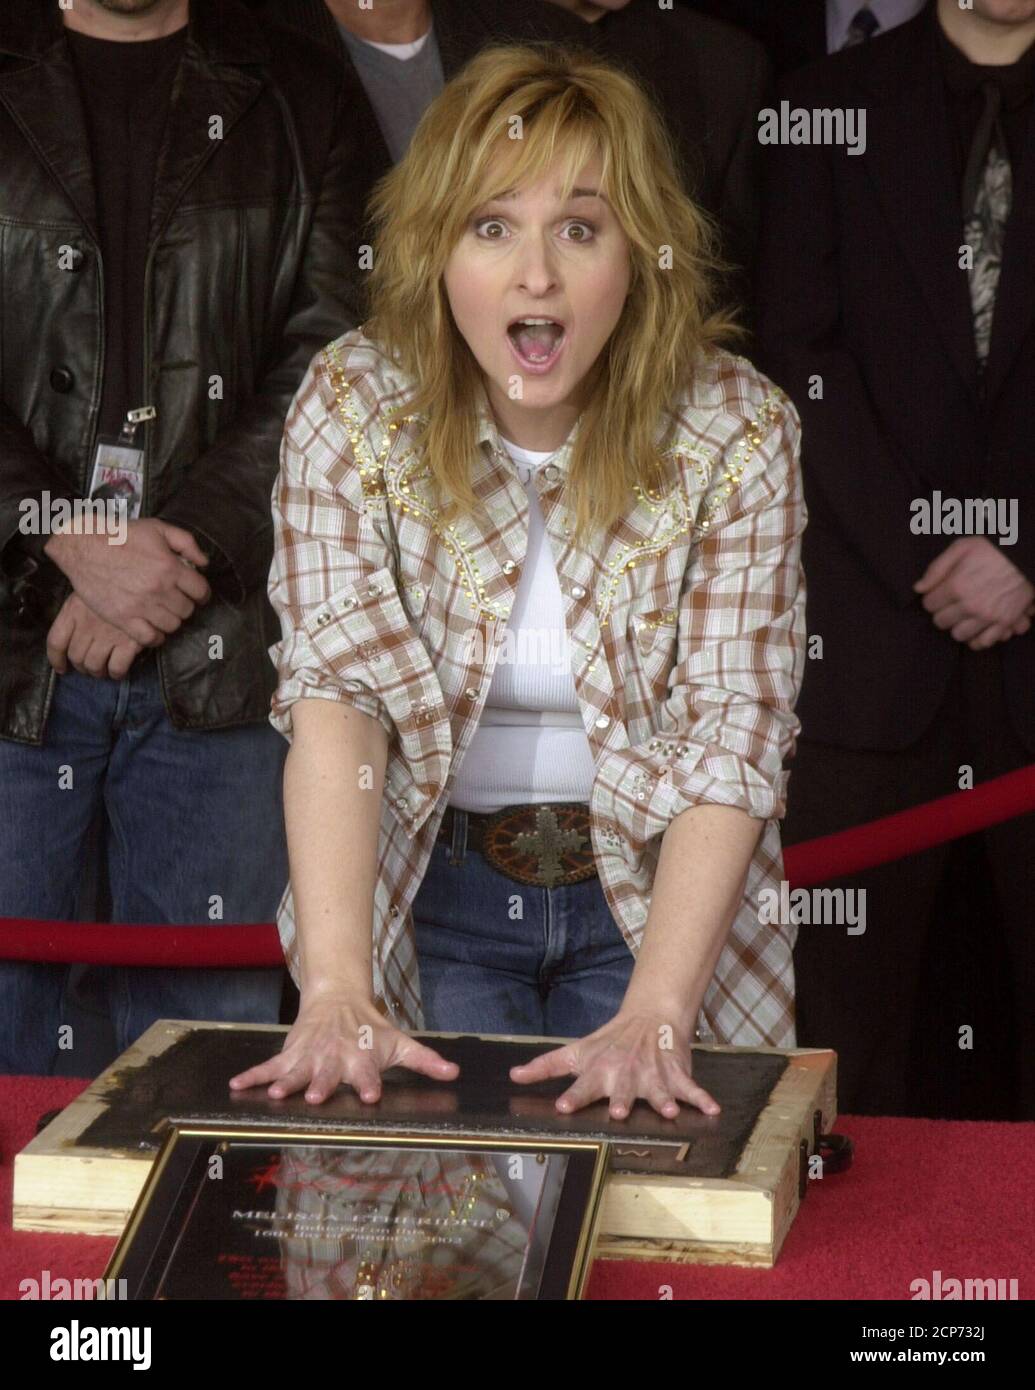 Rock singer and songwriter Melissa Etheridge reacts to the temperature saying, 'ooh, it's cold,'as she places her hands in wet cement during an induction ceremony at Hollywood's Rock Walk January 16, 2002 in Los Angeles, California. Etheridge's handprints and signature will be placed alongside those of other rock luminaries including Jimmy Hendrix, Carl Perkins, Aerosmith and Carlos Santana. REUTERS/Jim Ruymen  JR Stock Photo